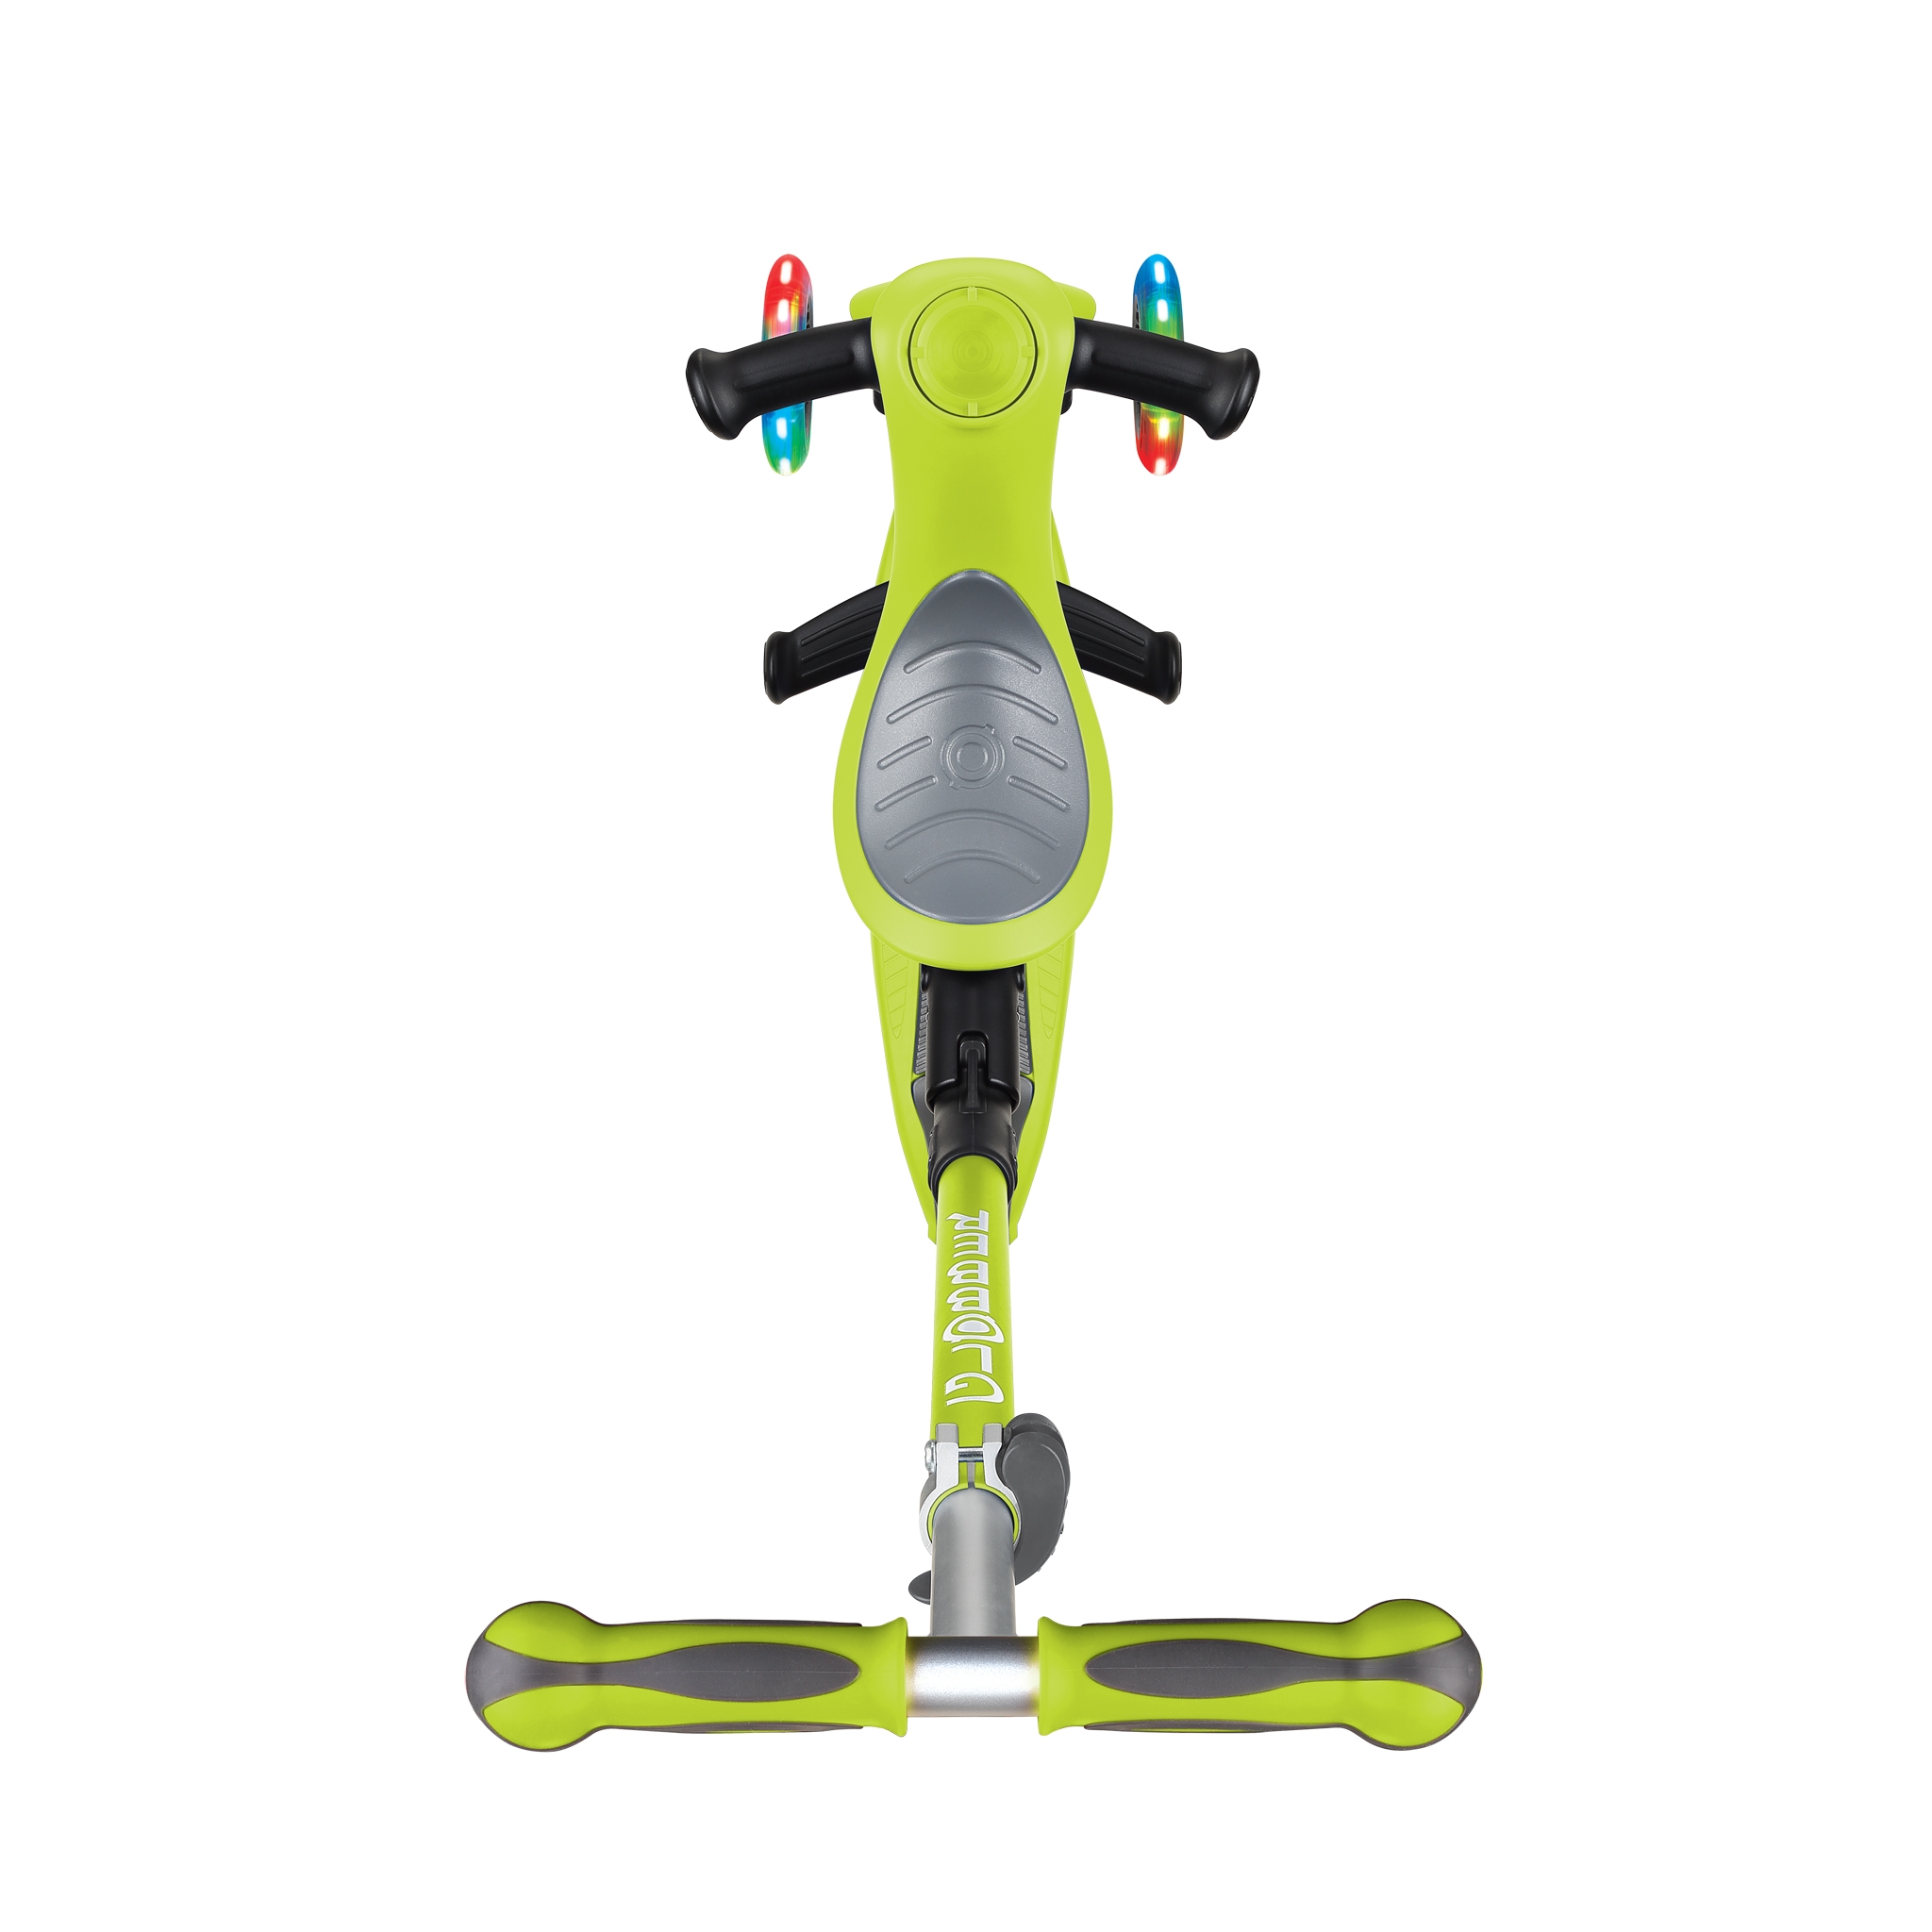 GO-UP-DELUXE-LIGHTS-ride-on-walking-bike-scooter-with-light-up-wheels-and-extra-wide-3-height-adjustable-seat-lime-green 2